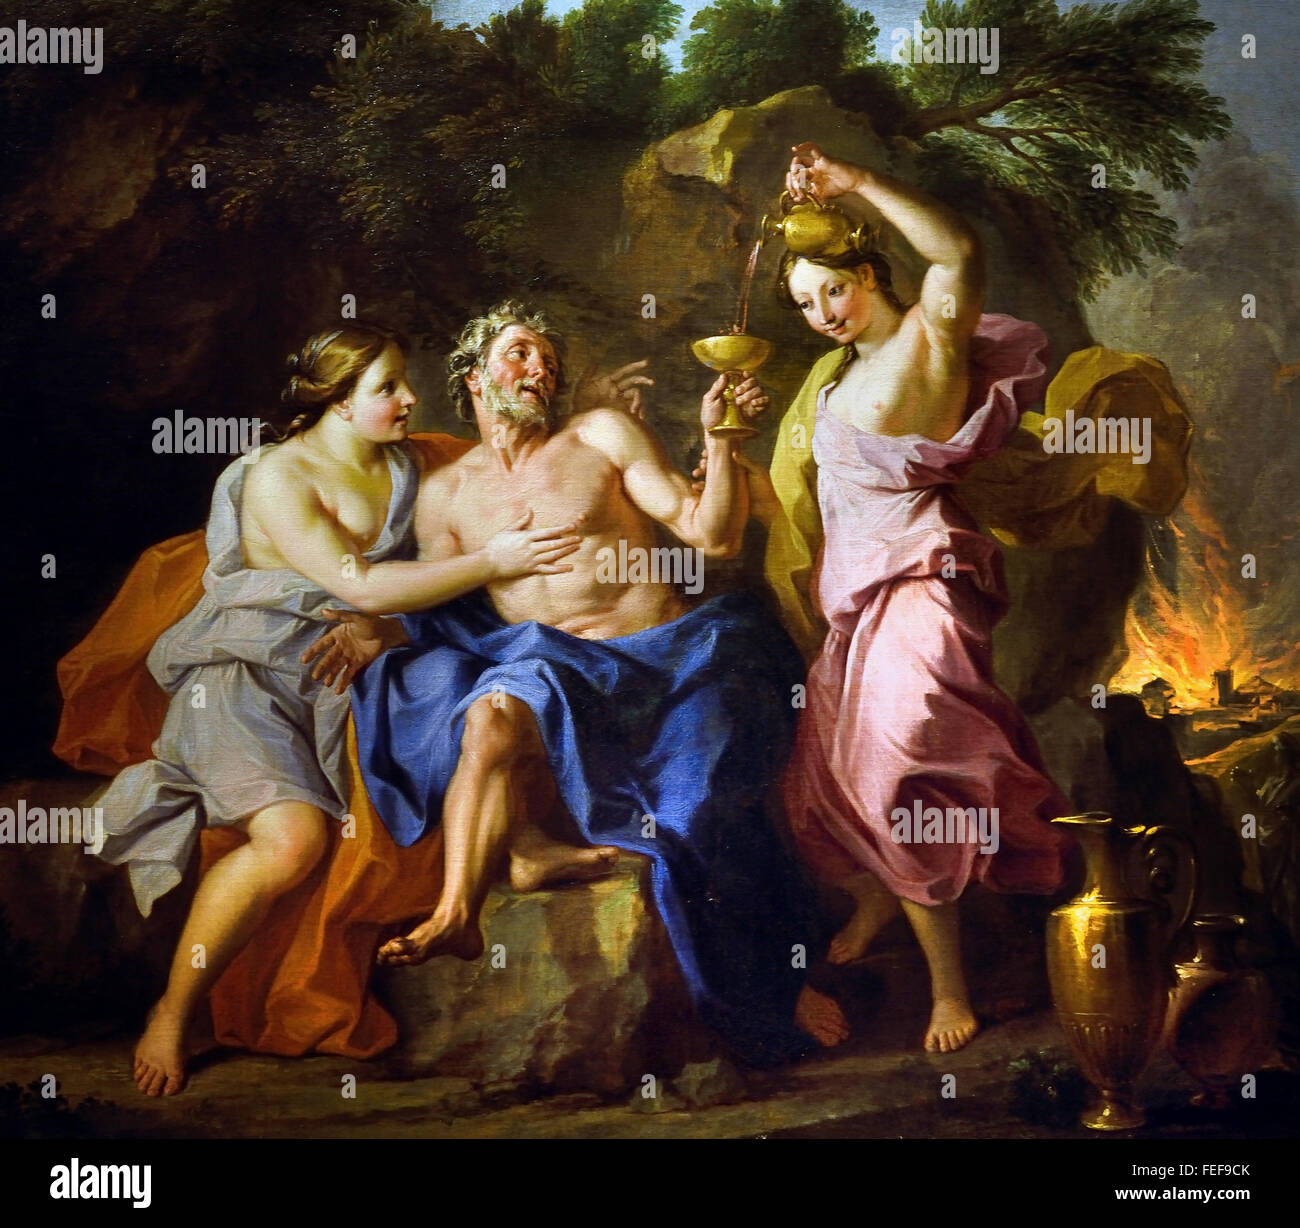 Lot and his Daughters (or Drunkenness Lot) by Noel Coypel 1628 1707 France French ( Elegant baroque composition. Harmony patches of bright color clothes red white blue pink and yellow. At bottom right, Sodom in flames ) Stock Photo